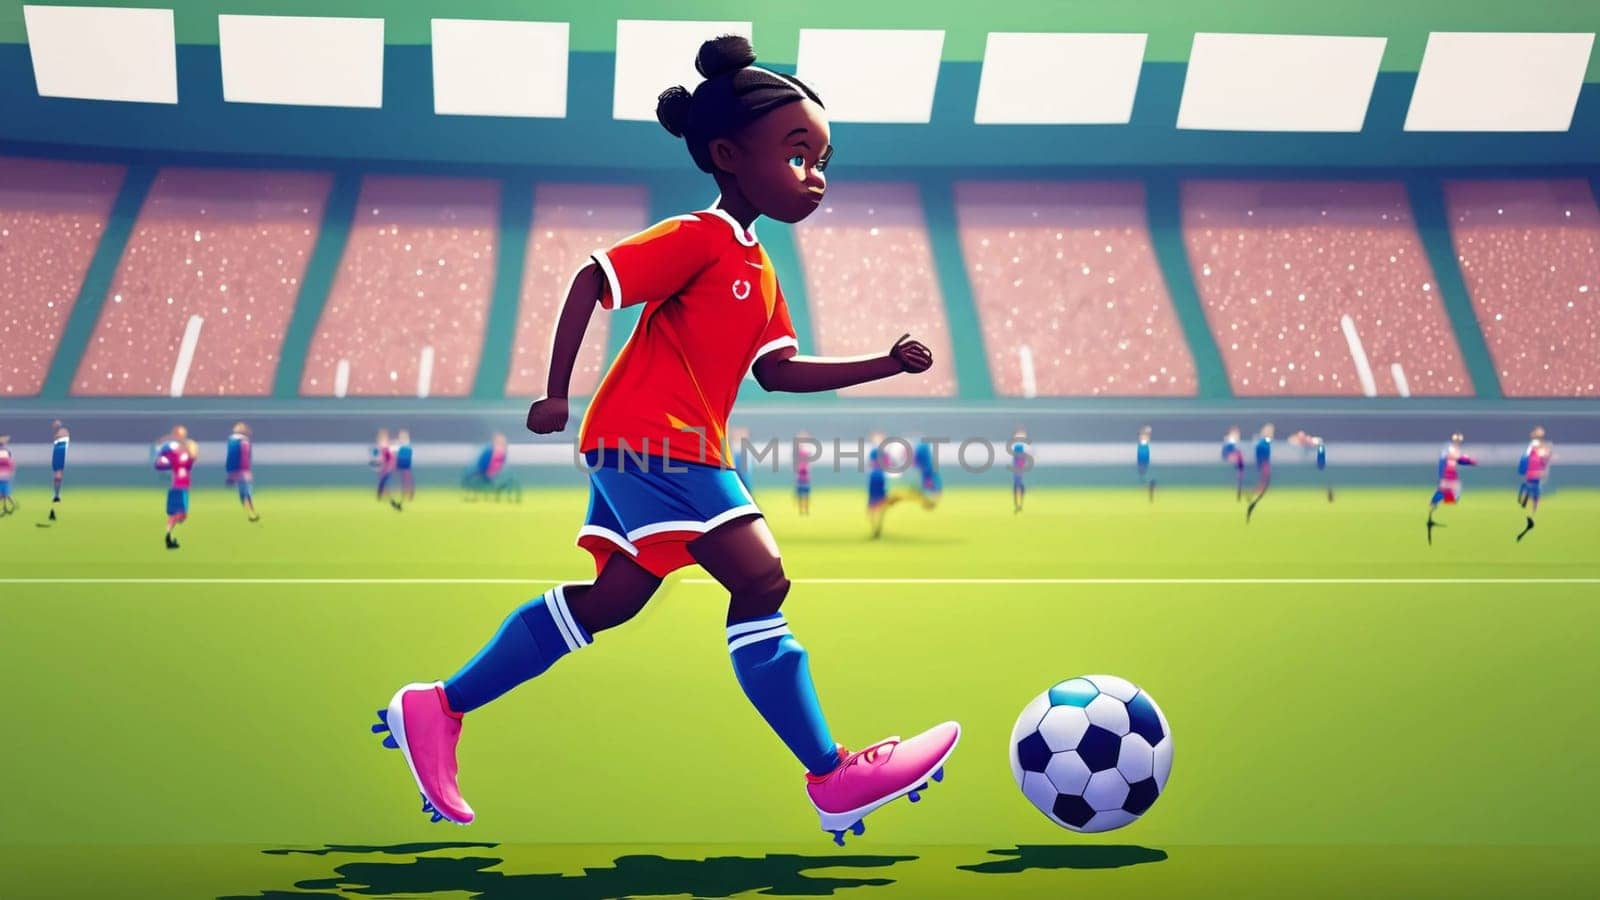 A young girl football player in colors of national spain football team plays with her feet a soccer ball. illustrations in cartoon style on sport stadium background for children by Costin